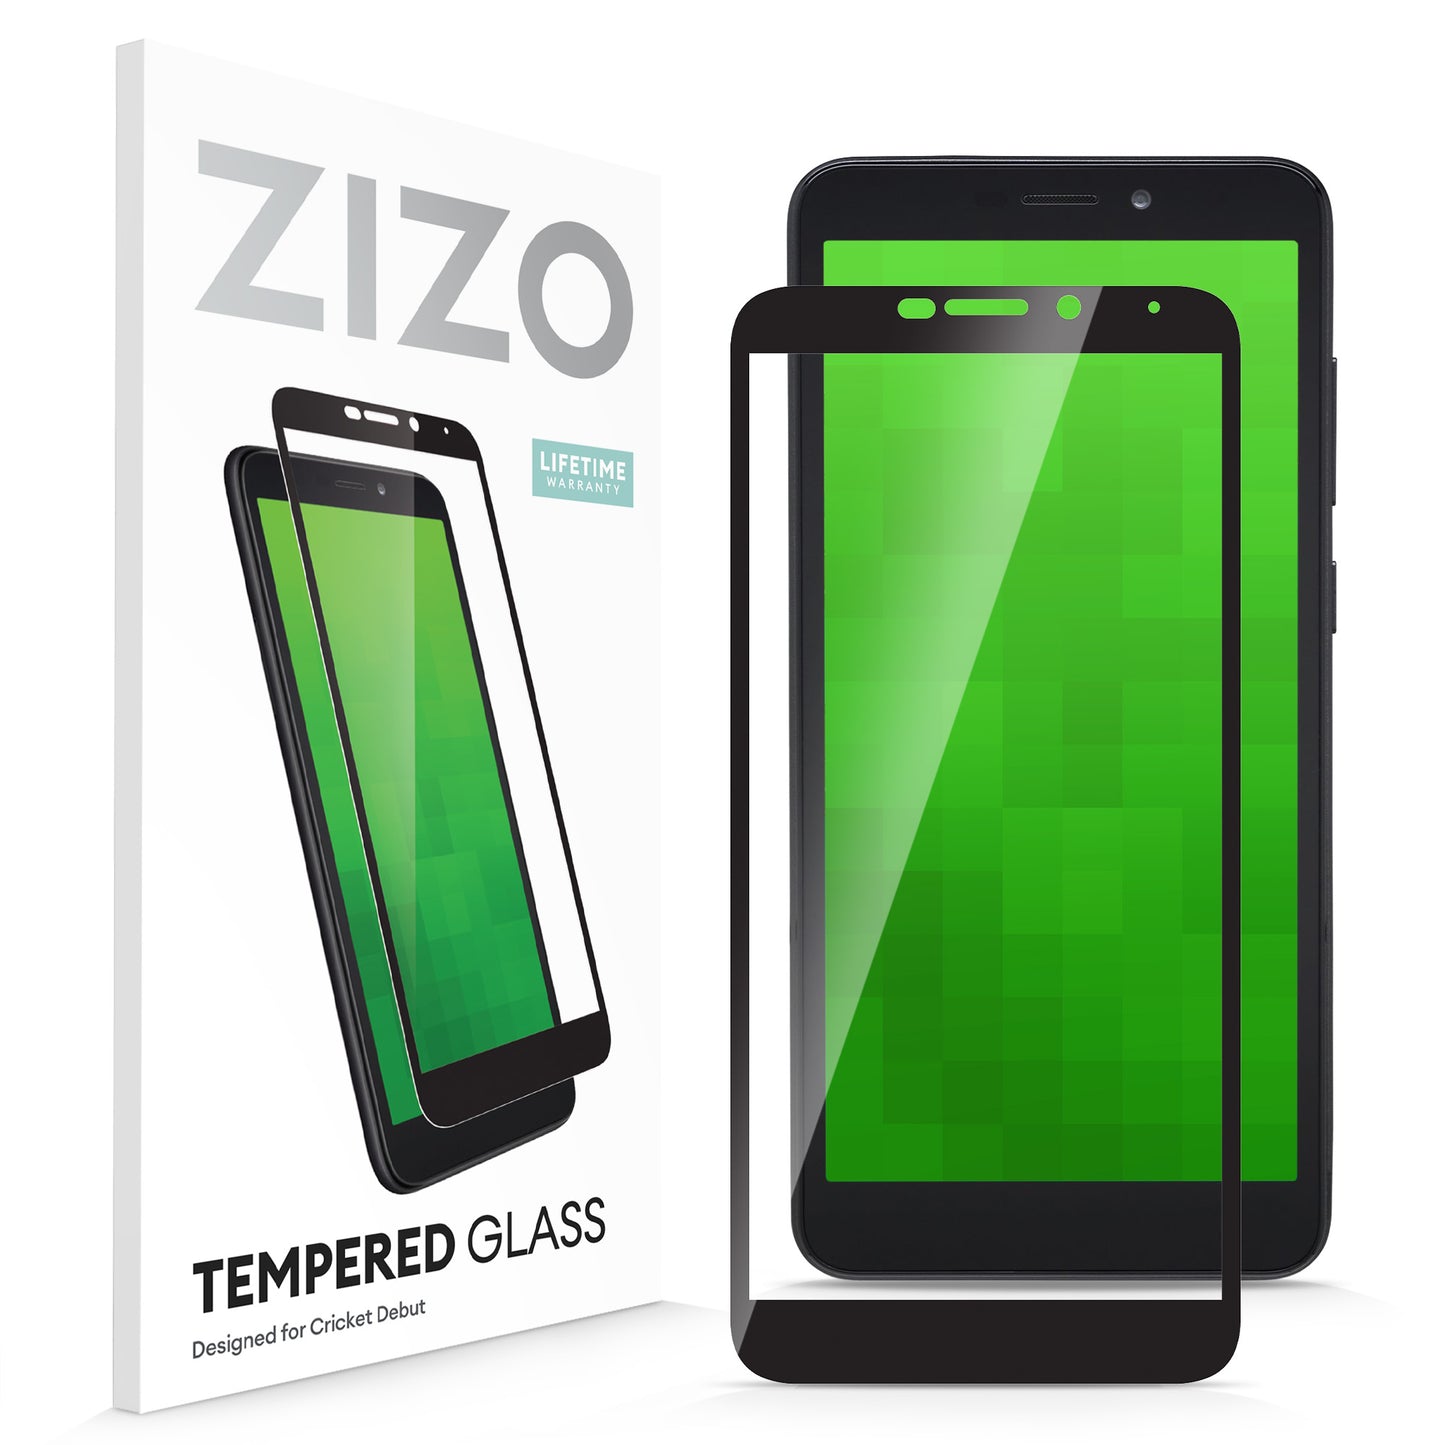 ZIZO TEMPERED GLASS Screen Protector for Cricket Debut